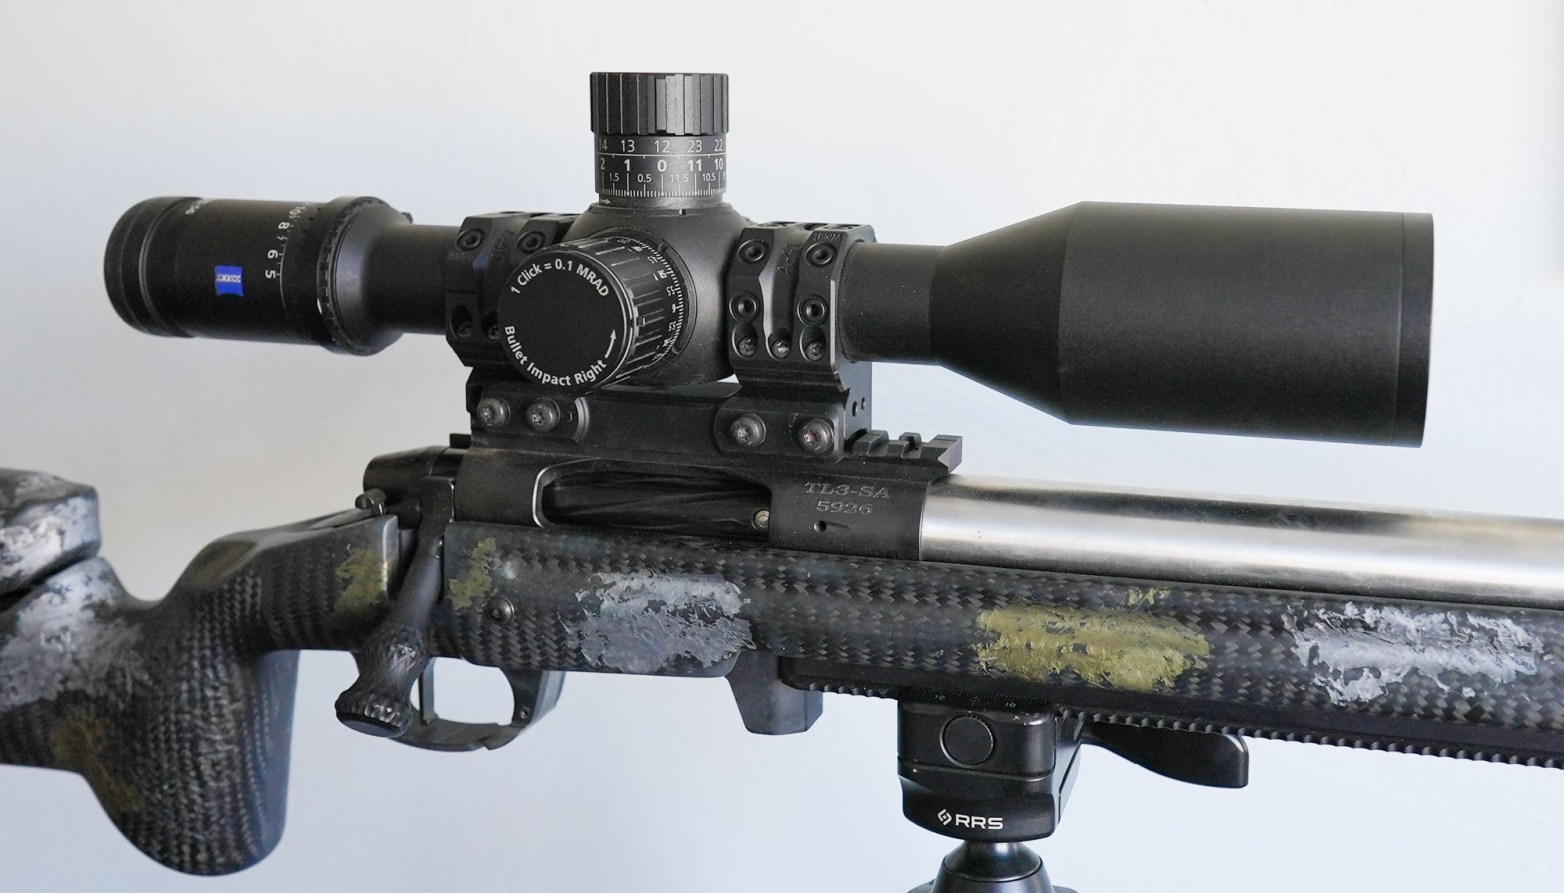 Zeiss LRP S5 5-25X56 on a precision rifle